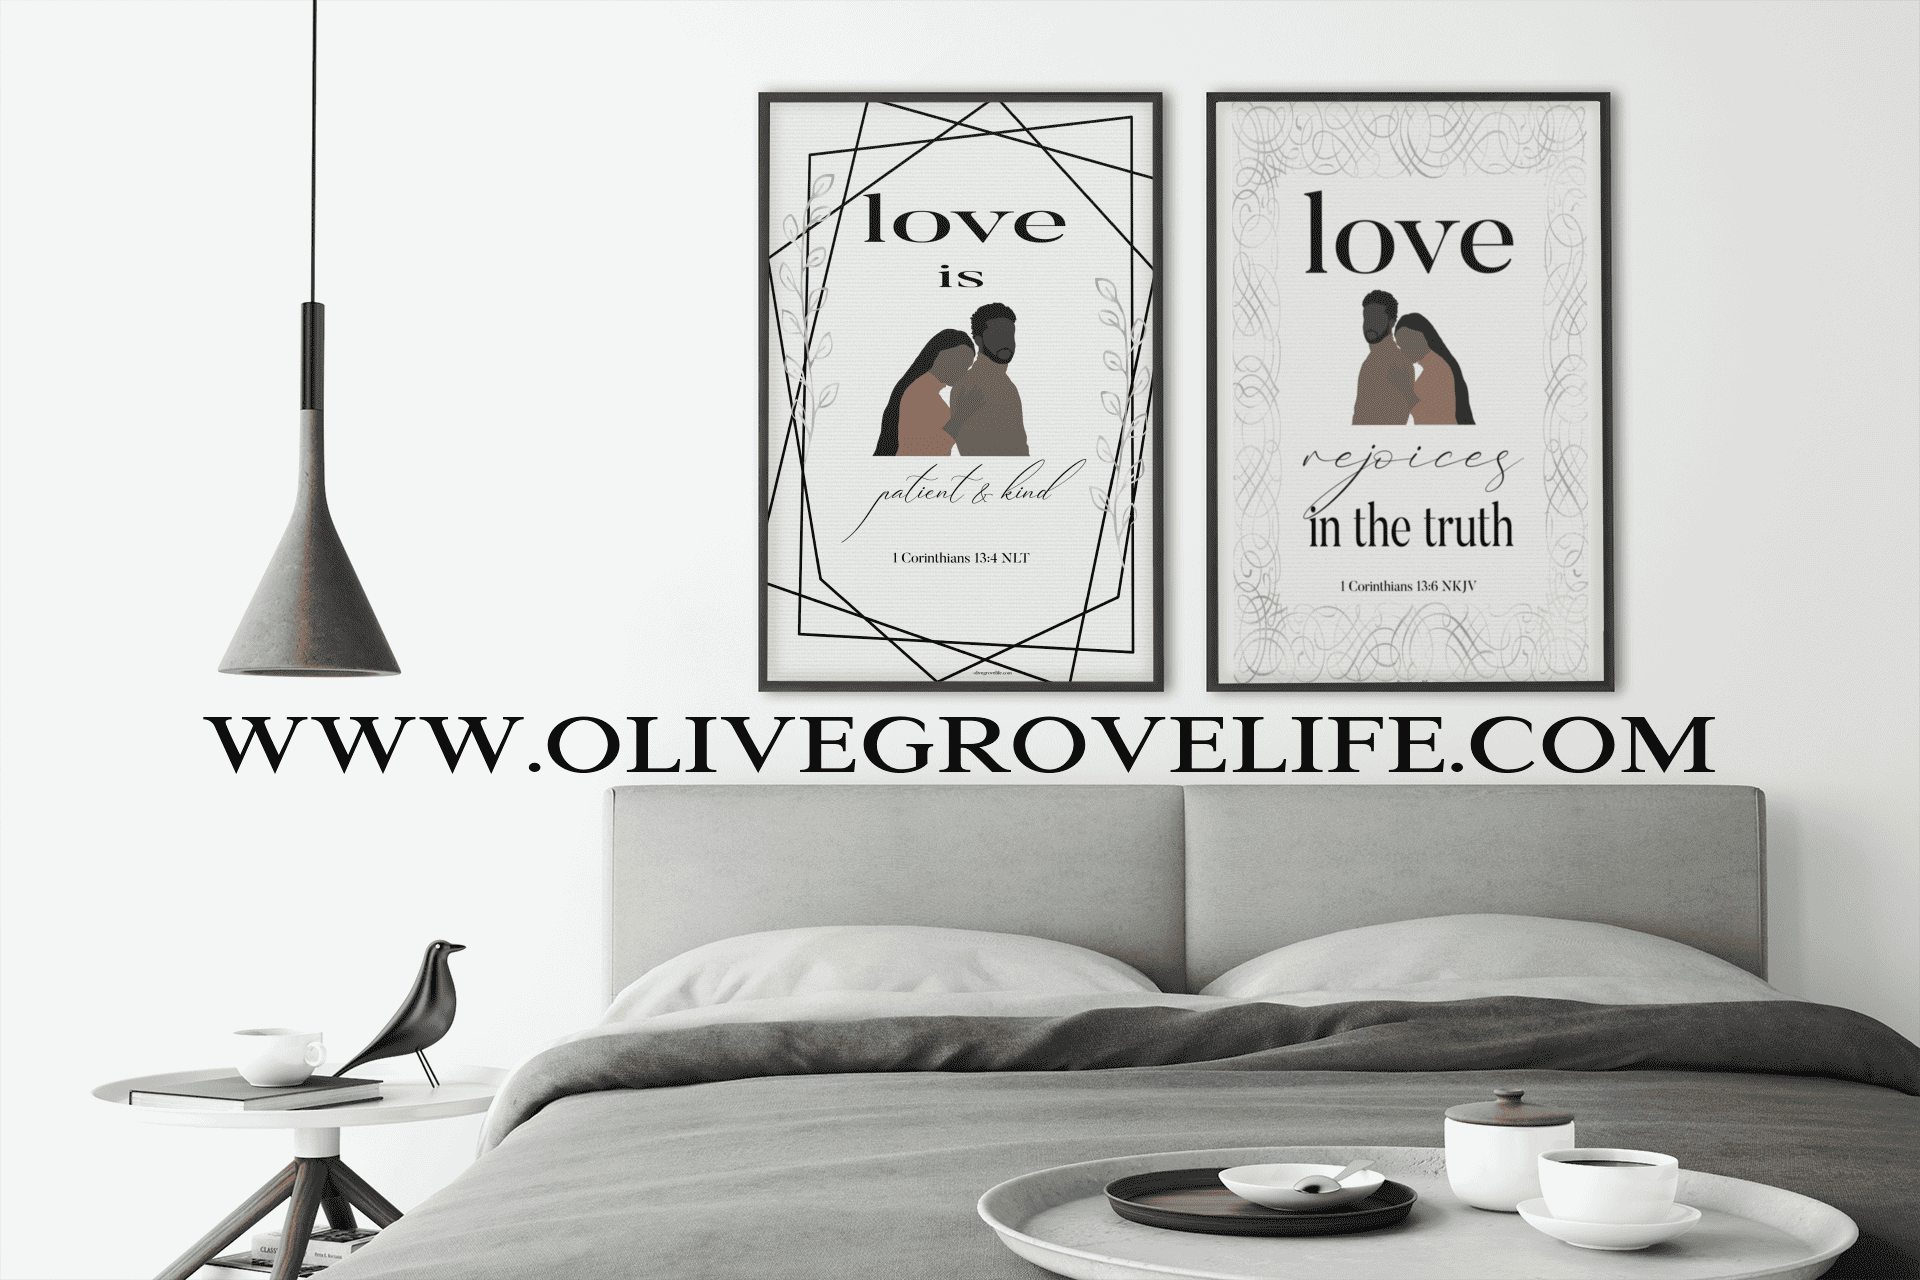 1 Corinthians 13:4 art print and 1 Corinthians 13:6 art print over bed